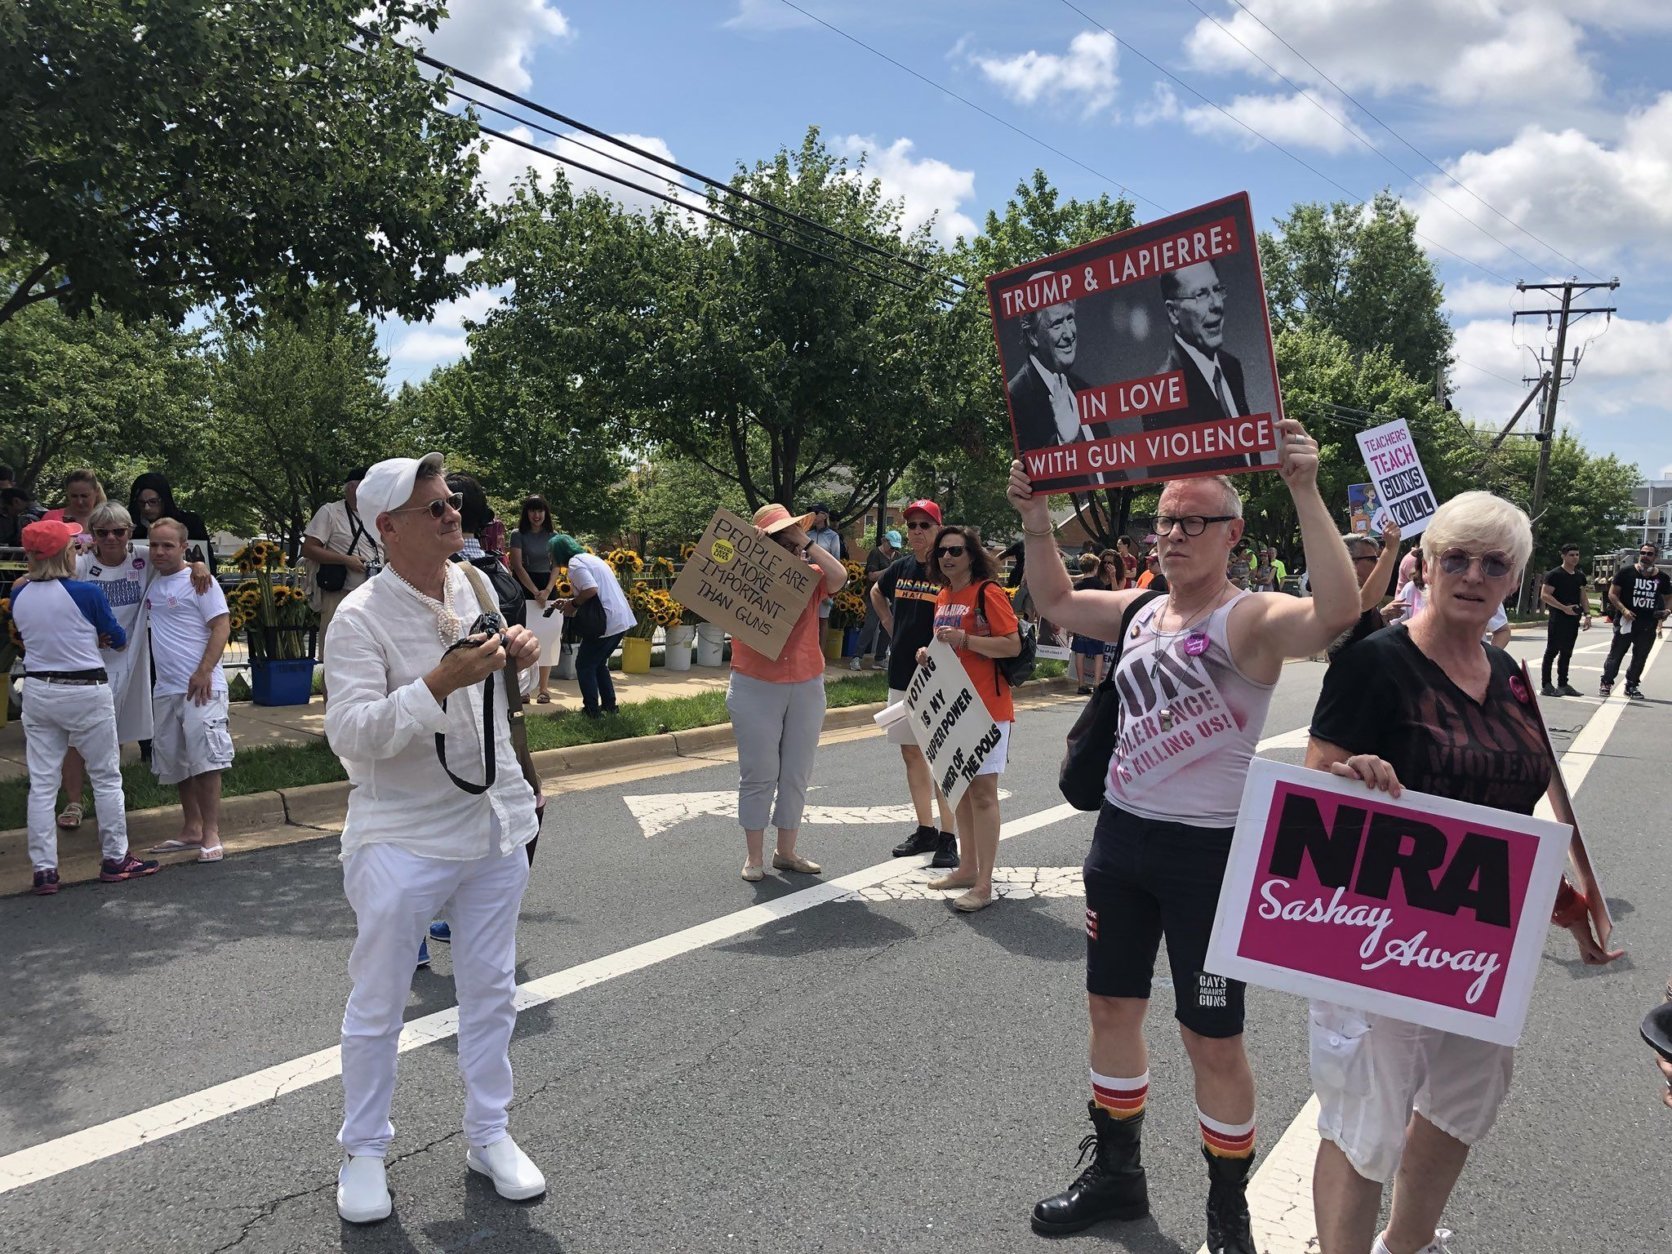 Hundreds rallies in the street outside the NRA headquarters on Saturday afternoon. (WTOP/Melissa Howell)